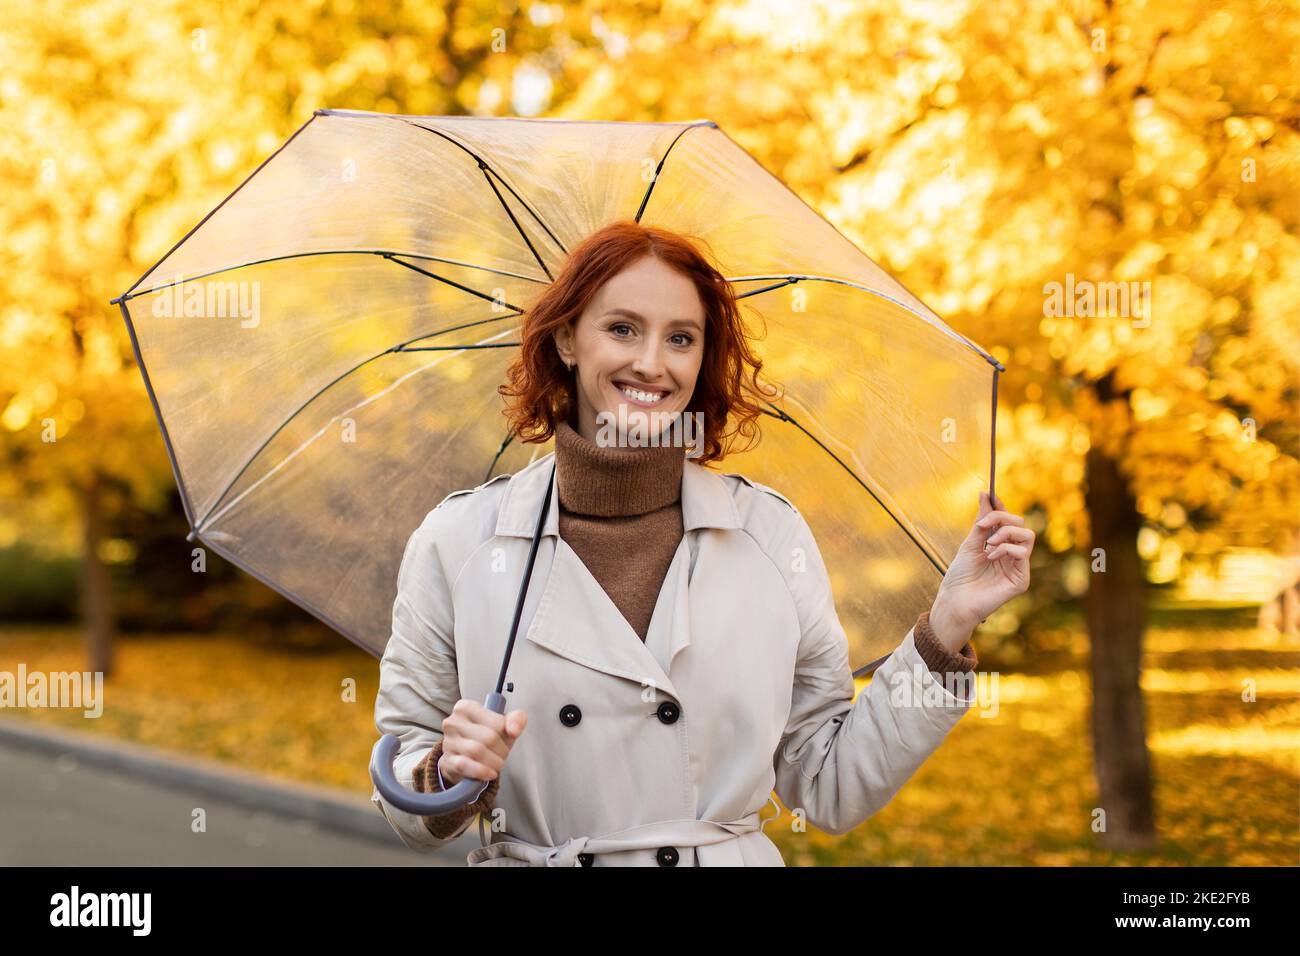 Happy caucasian millennial woman with red hair in raincoat with umbrella enjoys rain, weather and yellow leaves Stock Photo